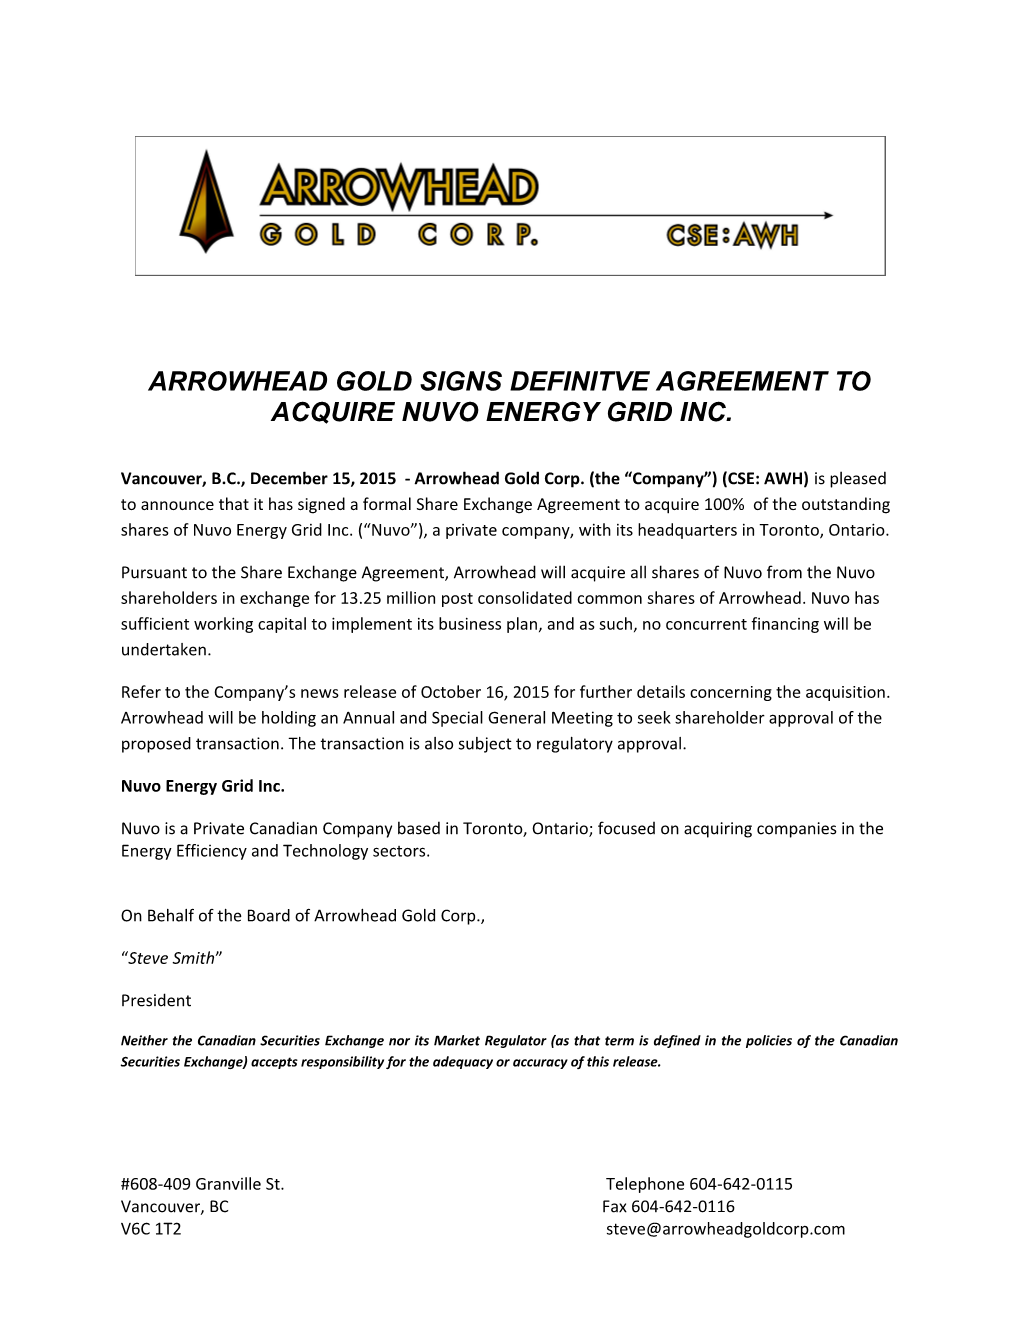 Arrowhead Gold Signs Definitve Agreement to Acquire Nuvo Energy Grid Inc